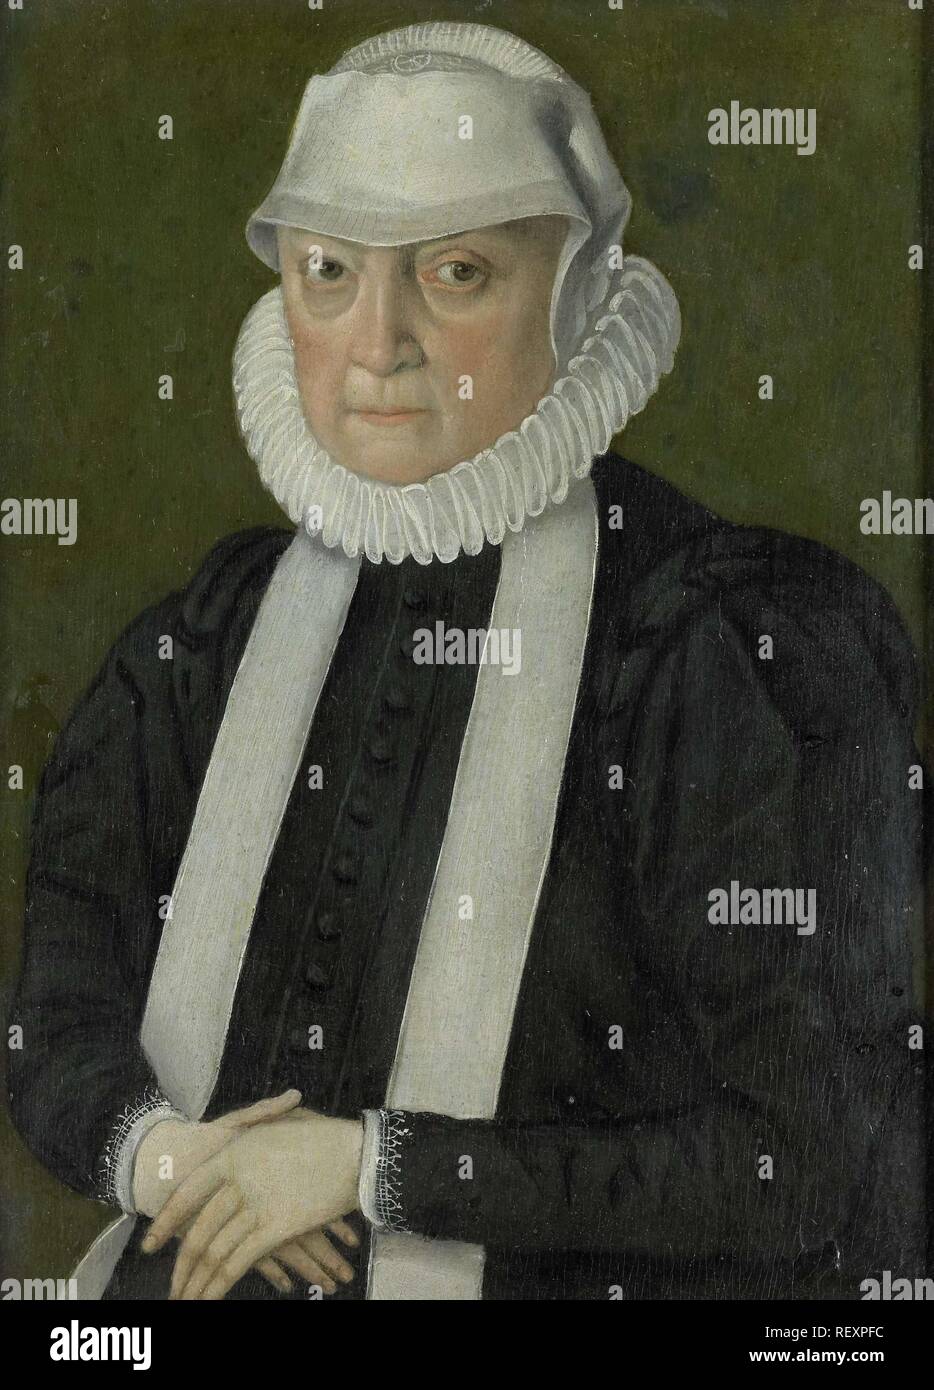 Portrait of a Woman, probably Anna Jagellonia, Queen of Poland. Dating: 1570 - 1580. Place: Keulen. Measurements: h 19.2 cm × w 14.2 cm; h 22.3 cm × w 17 cm × d 1.5 cm. Museum: Rijksmuseum, Amsterdam. Author: ANONYMOUS (POSSIBLY). ANONYMOUS. Stock Photo